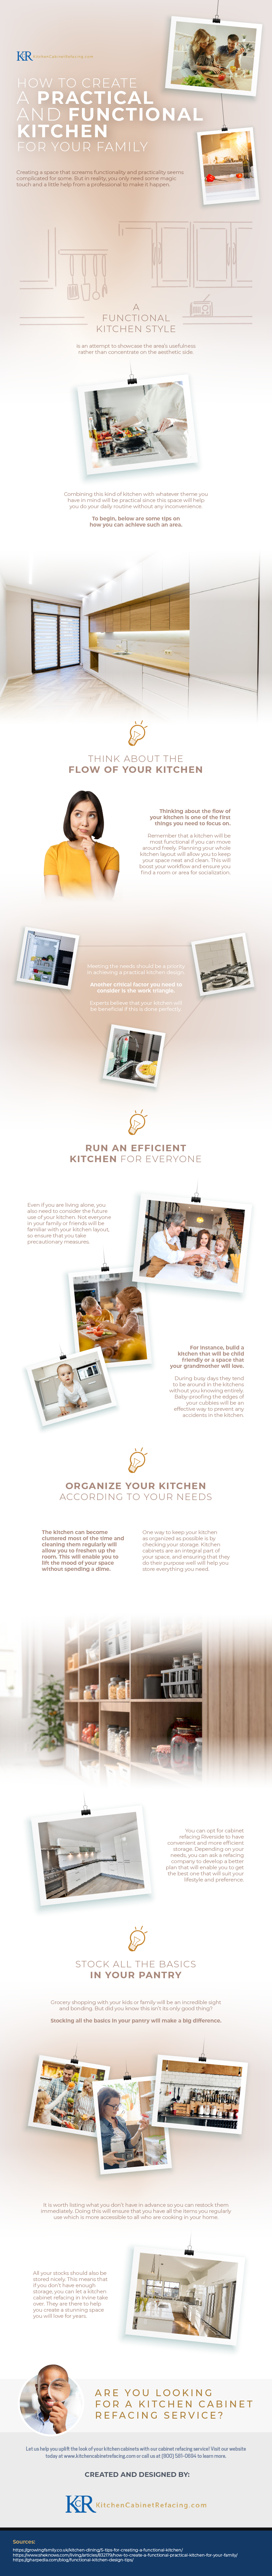 How_To_Create_a_Practical_and_Functional_Kitchen_for_Your_Family_image